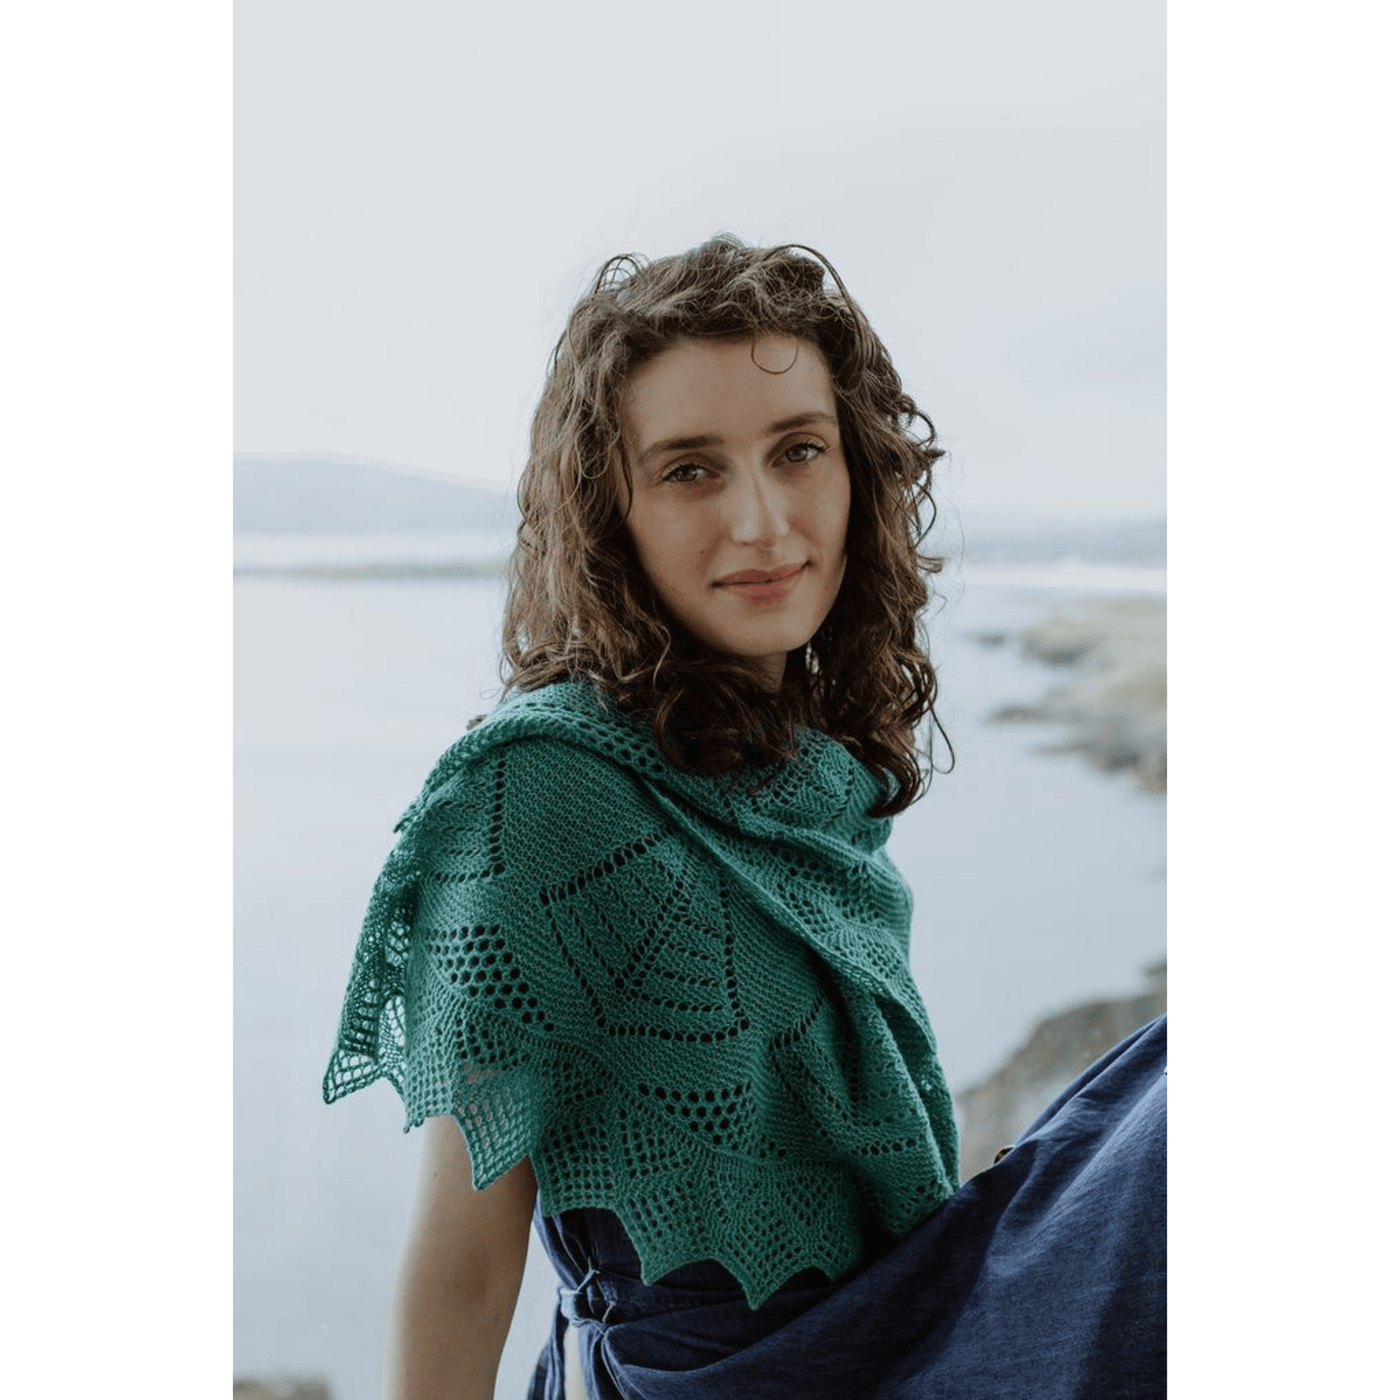 The Woolly Thistle image from Shetland Wool Week Annual 2021 featuring a woman sitting by the ocean wearing knitted green shawl